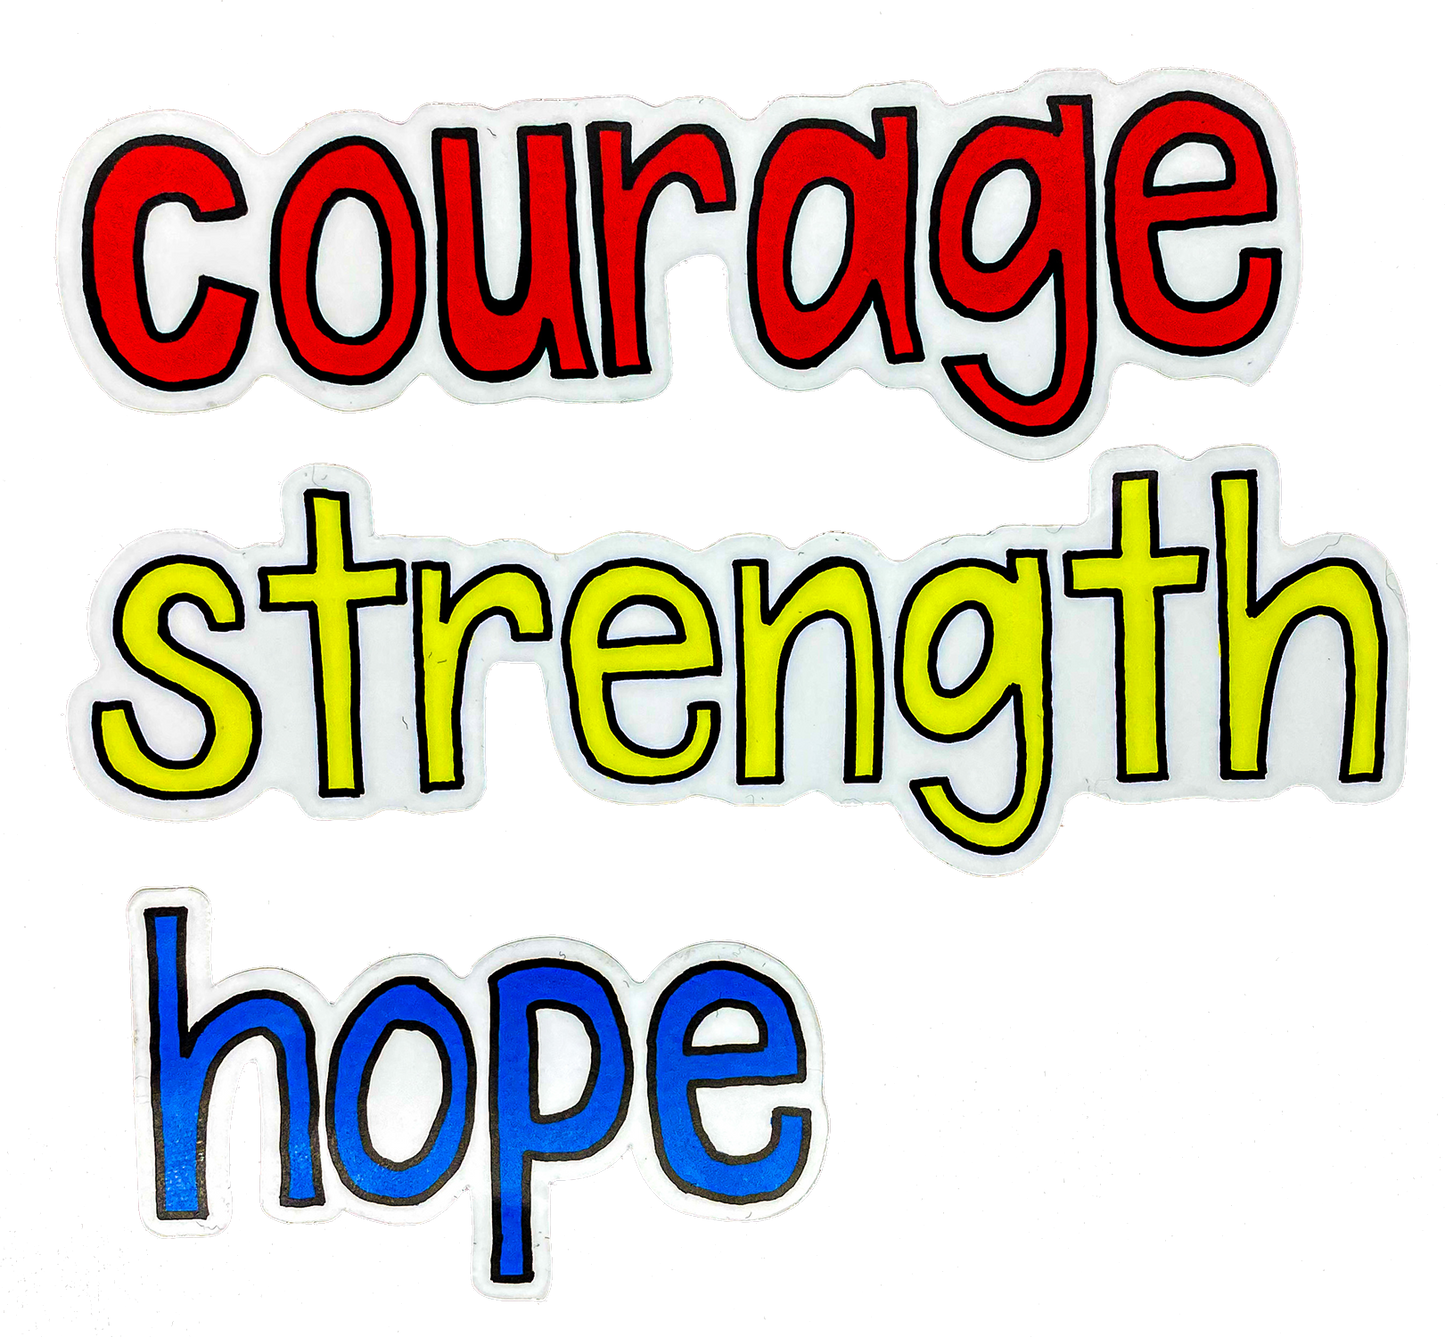 Courage, Strength, and Hope Magnet - TinySuperheroes